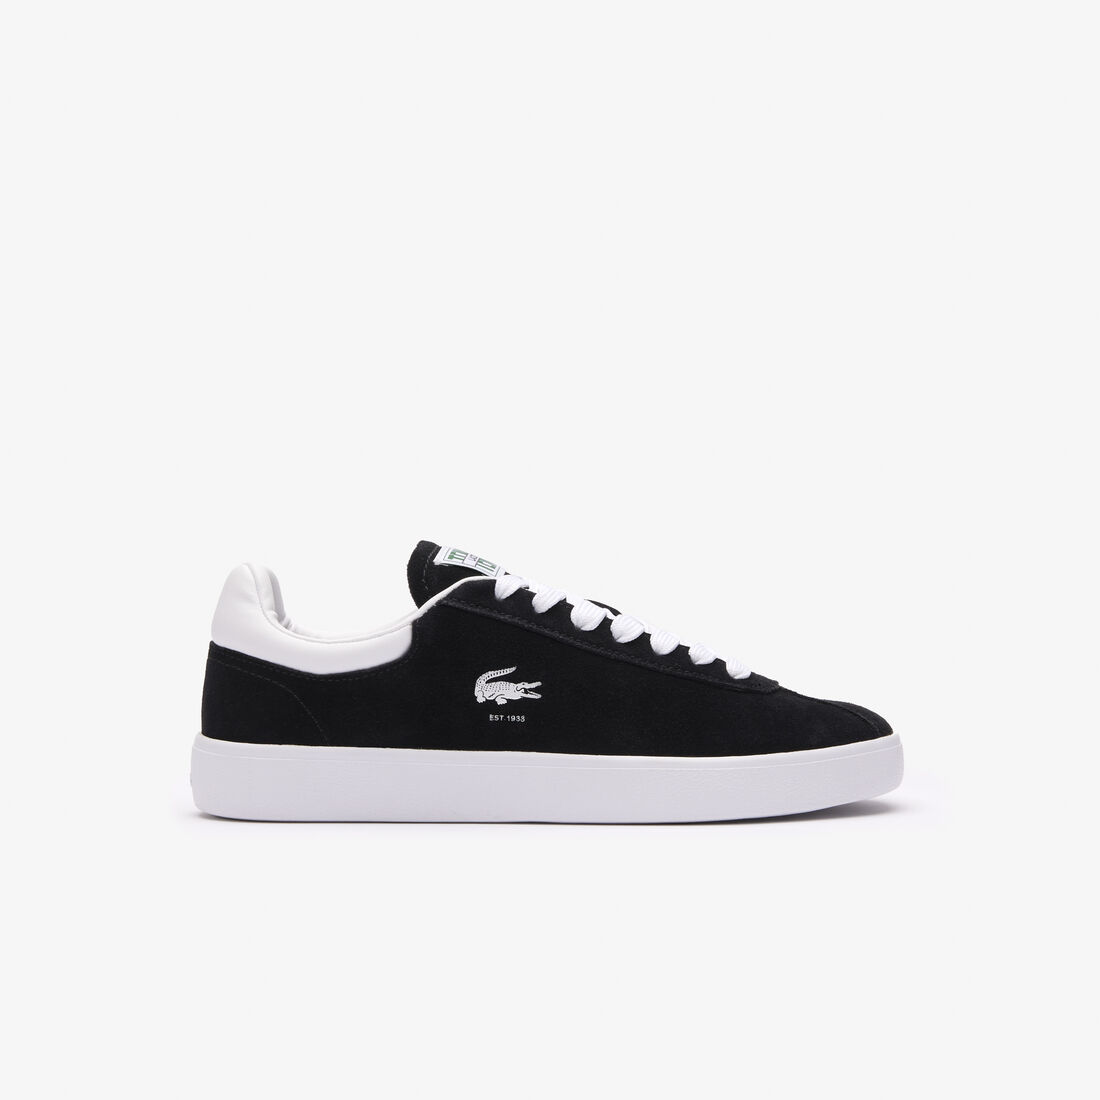 Buy Women's Baseshot Suede Trainers | Lacoste UAE